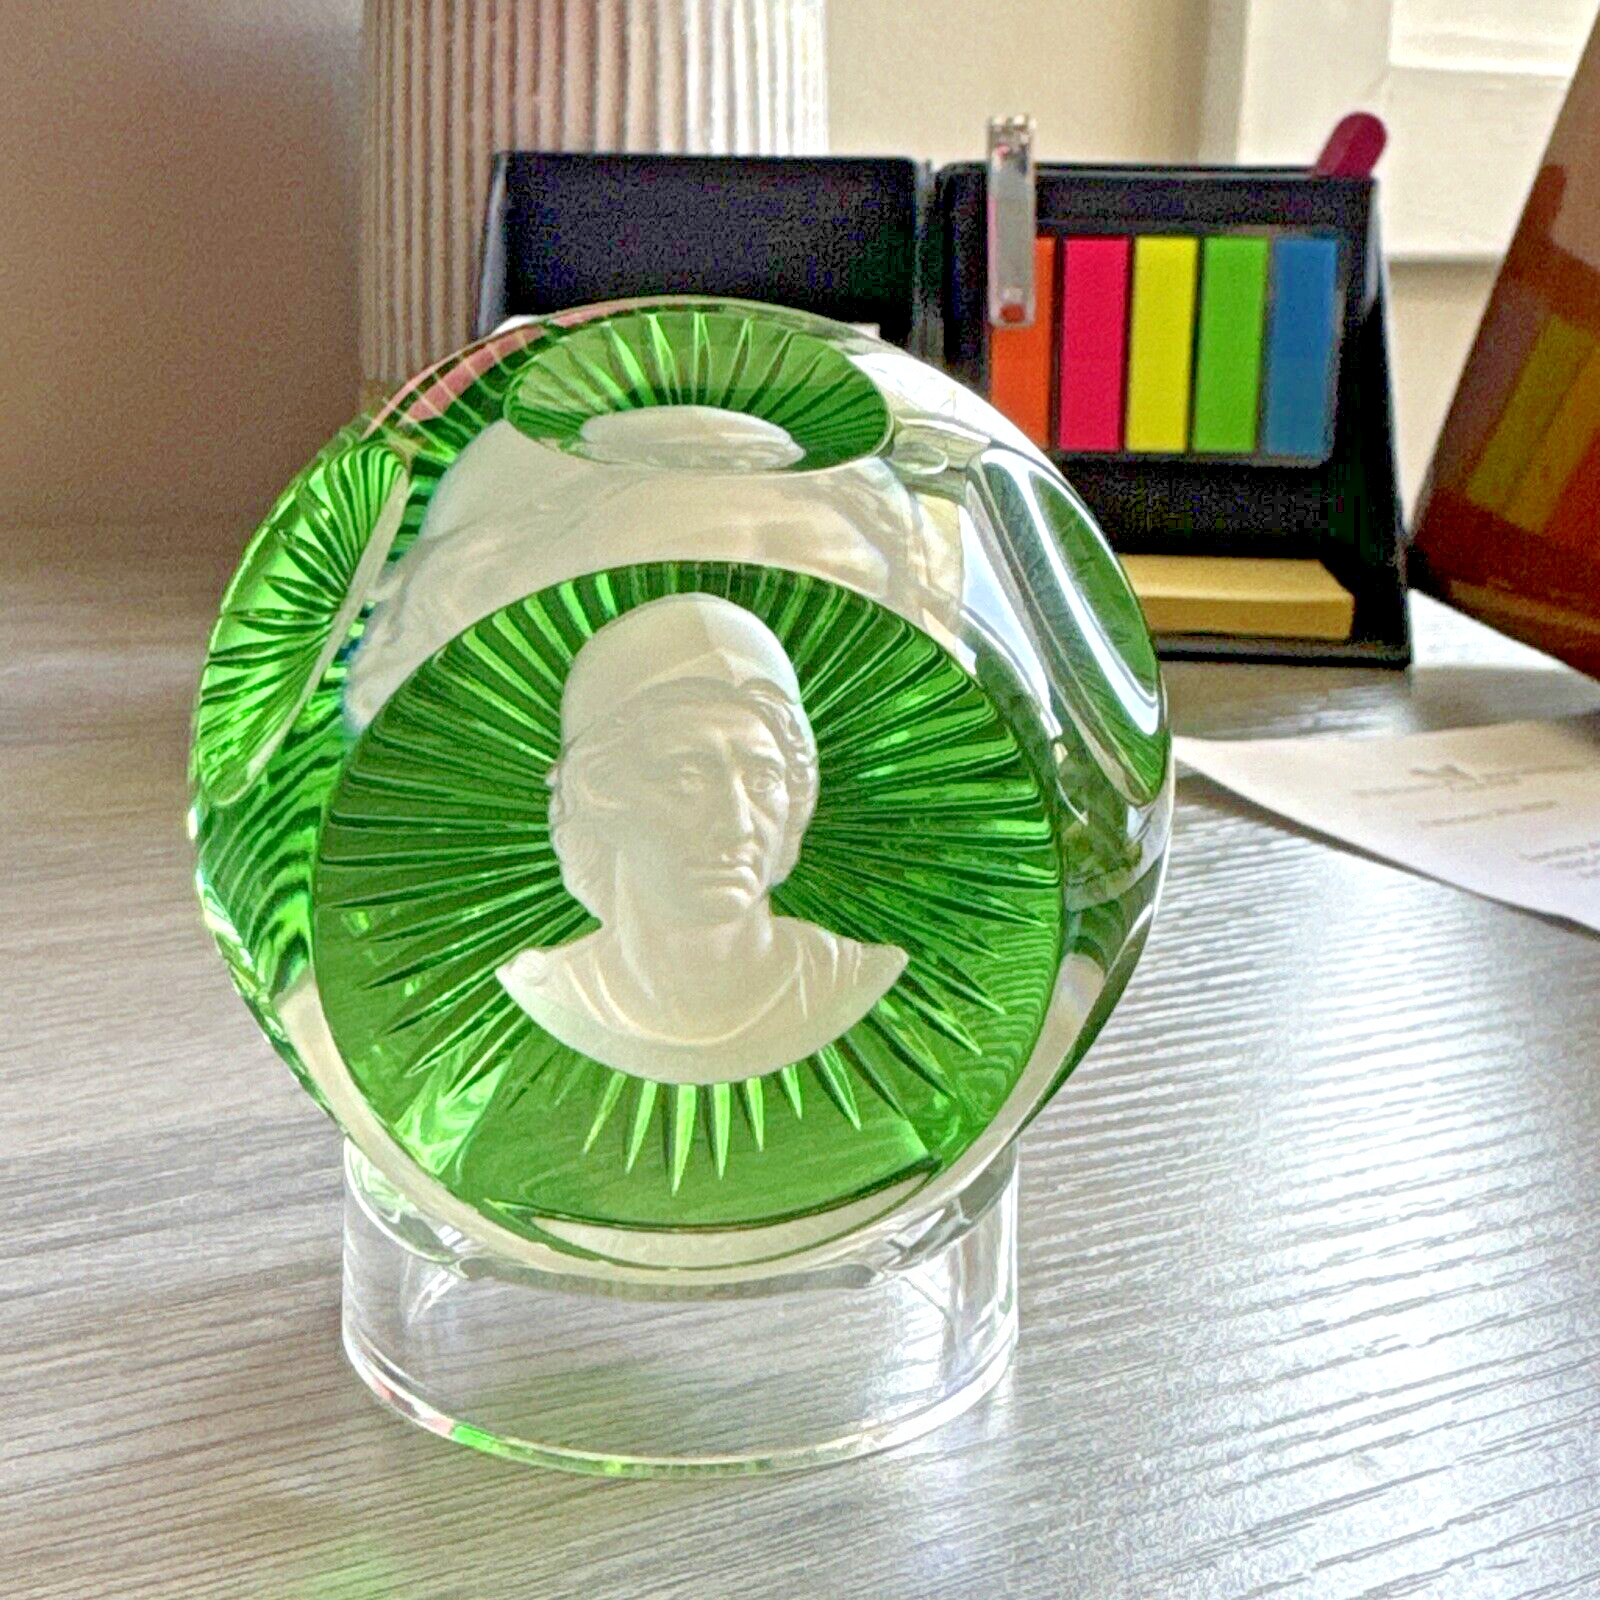 RARE Alexander the Great 1975 Baccarat Franklin Mint Crystal Paper Weight